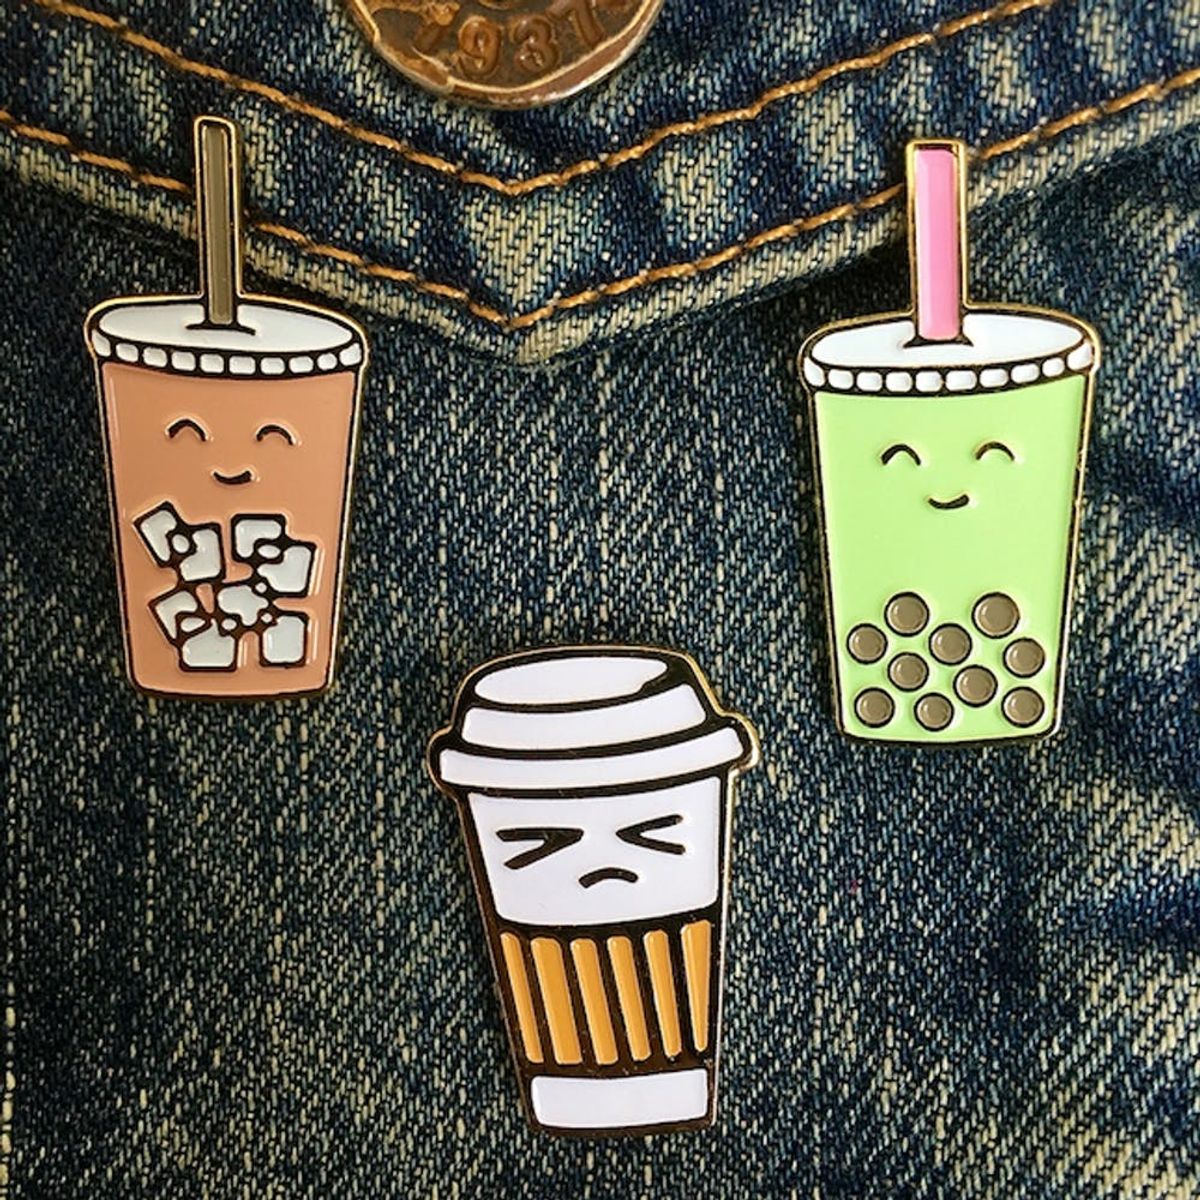 This Artist’s Fun Food-Inspired Drawings Will Brighten Anyone’s Day